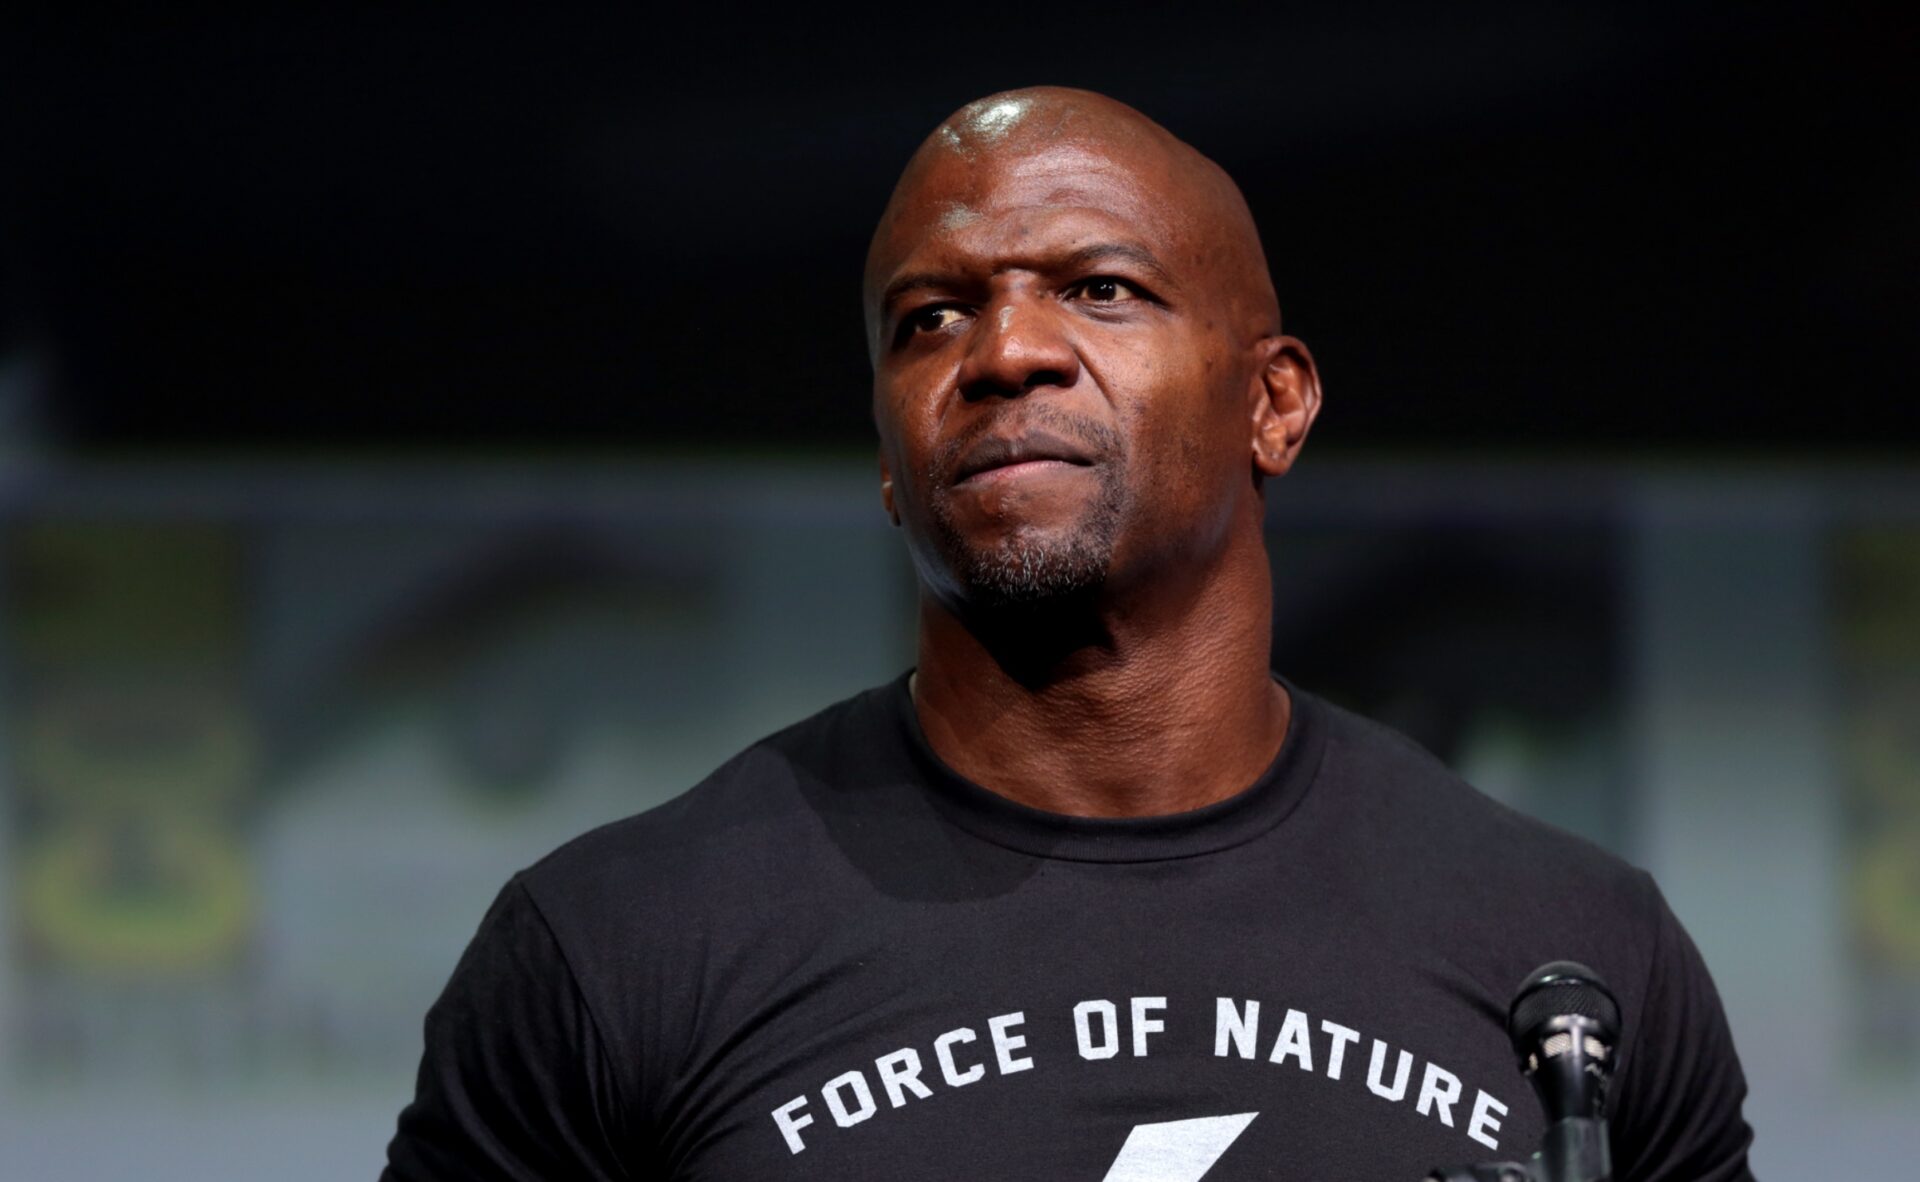 Terry Crews Reveals He Was Paid nothing for “Training Day,” and $4,000 for “Friday After Next”